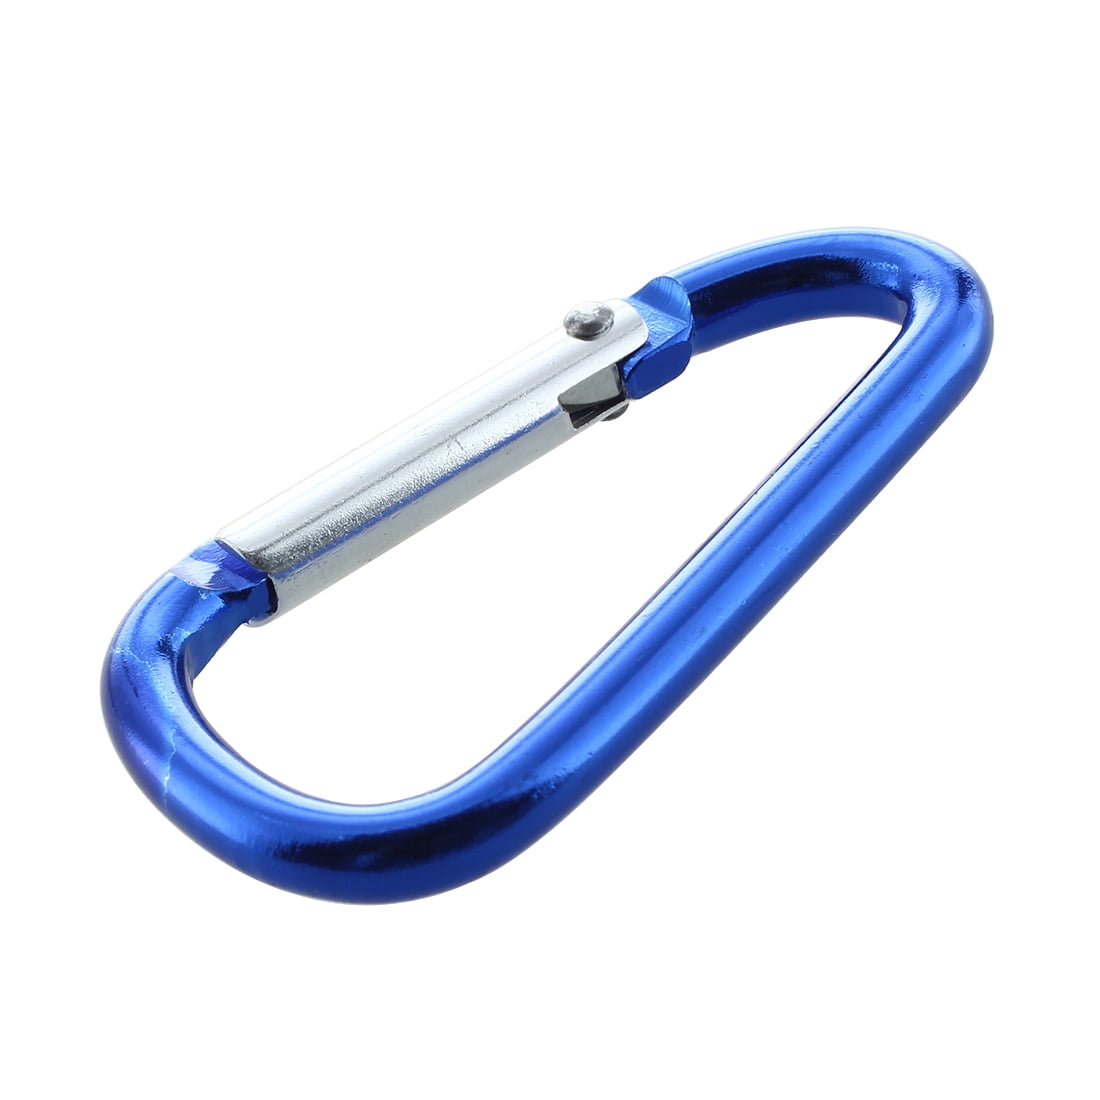 Blue Pear Shaped Carabiner for Camping Y2Y8 